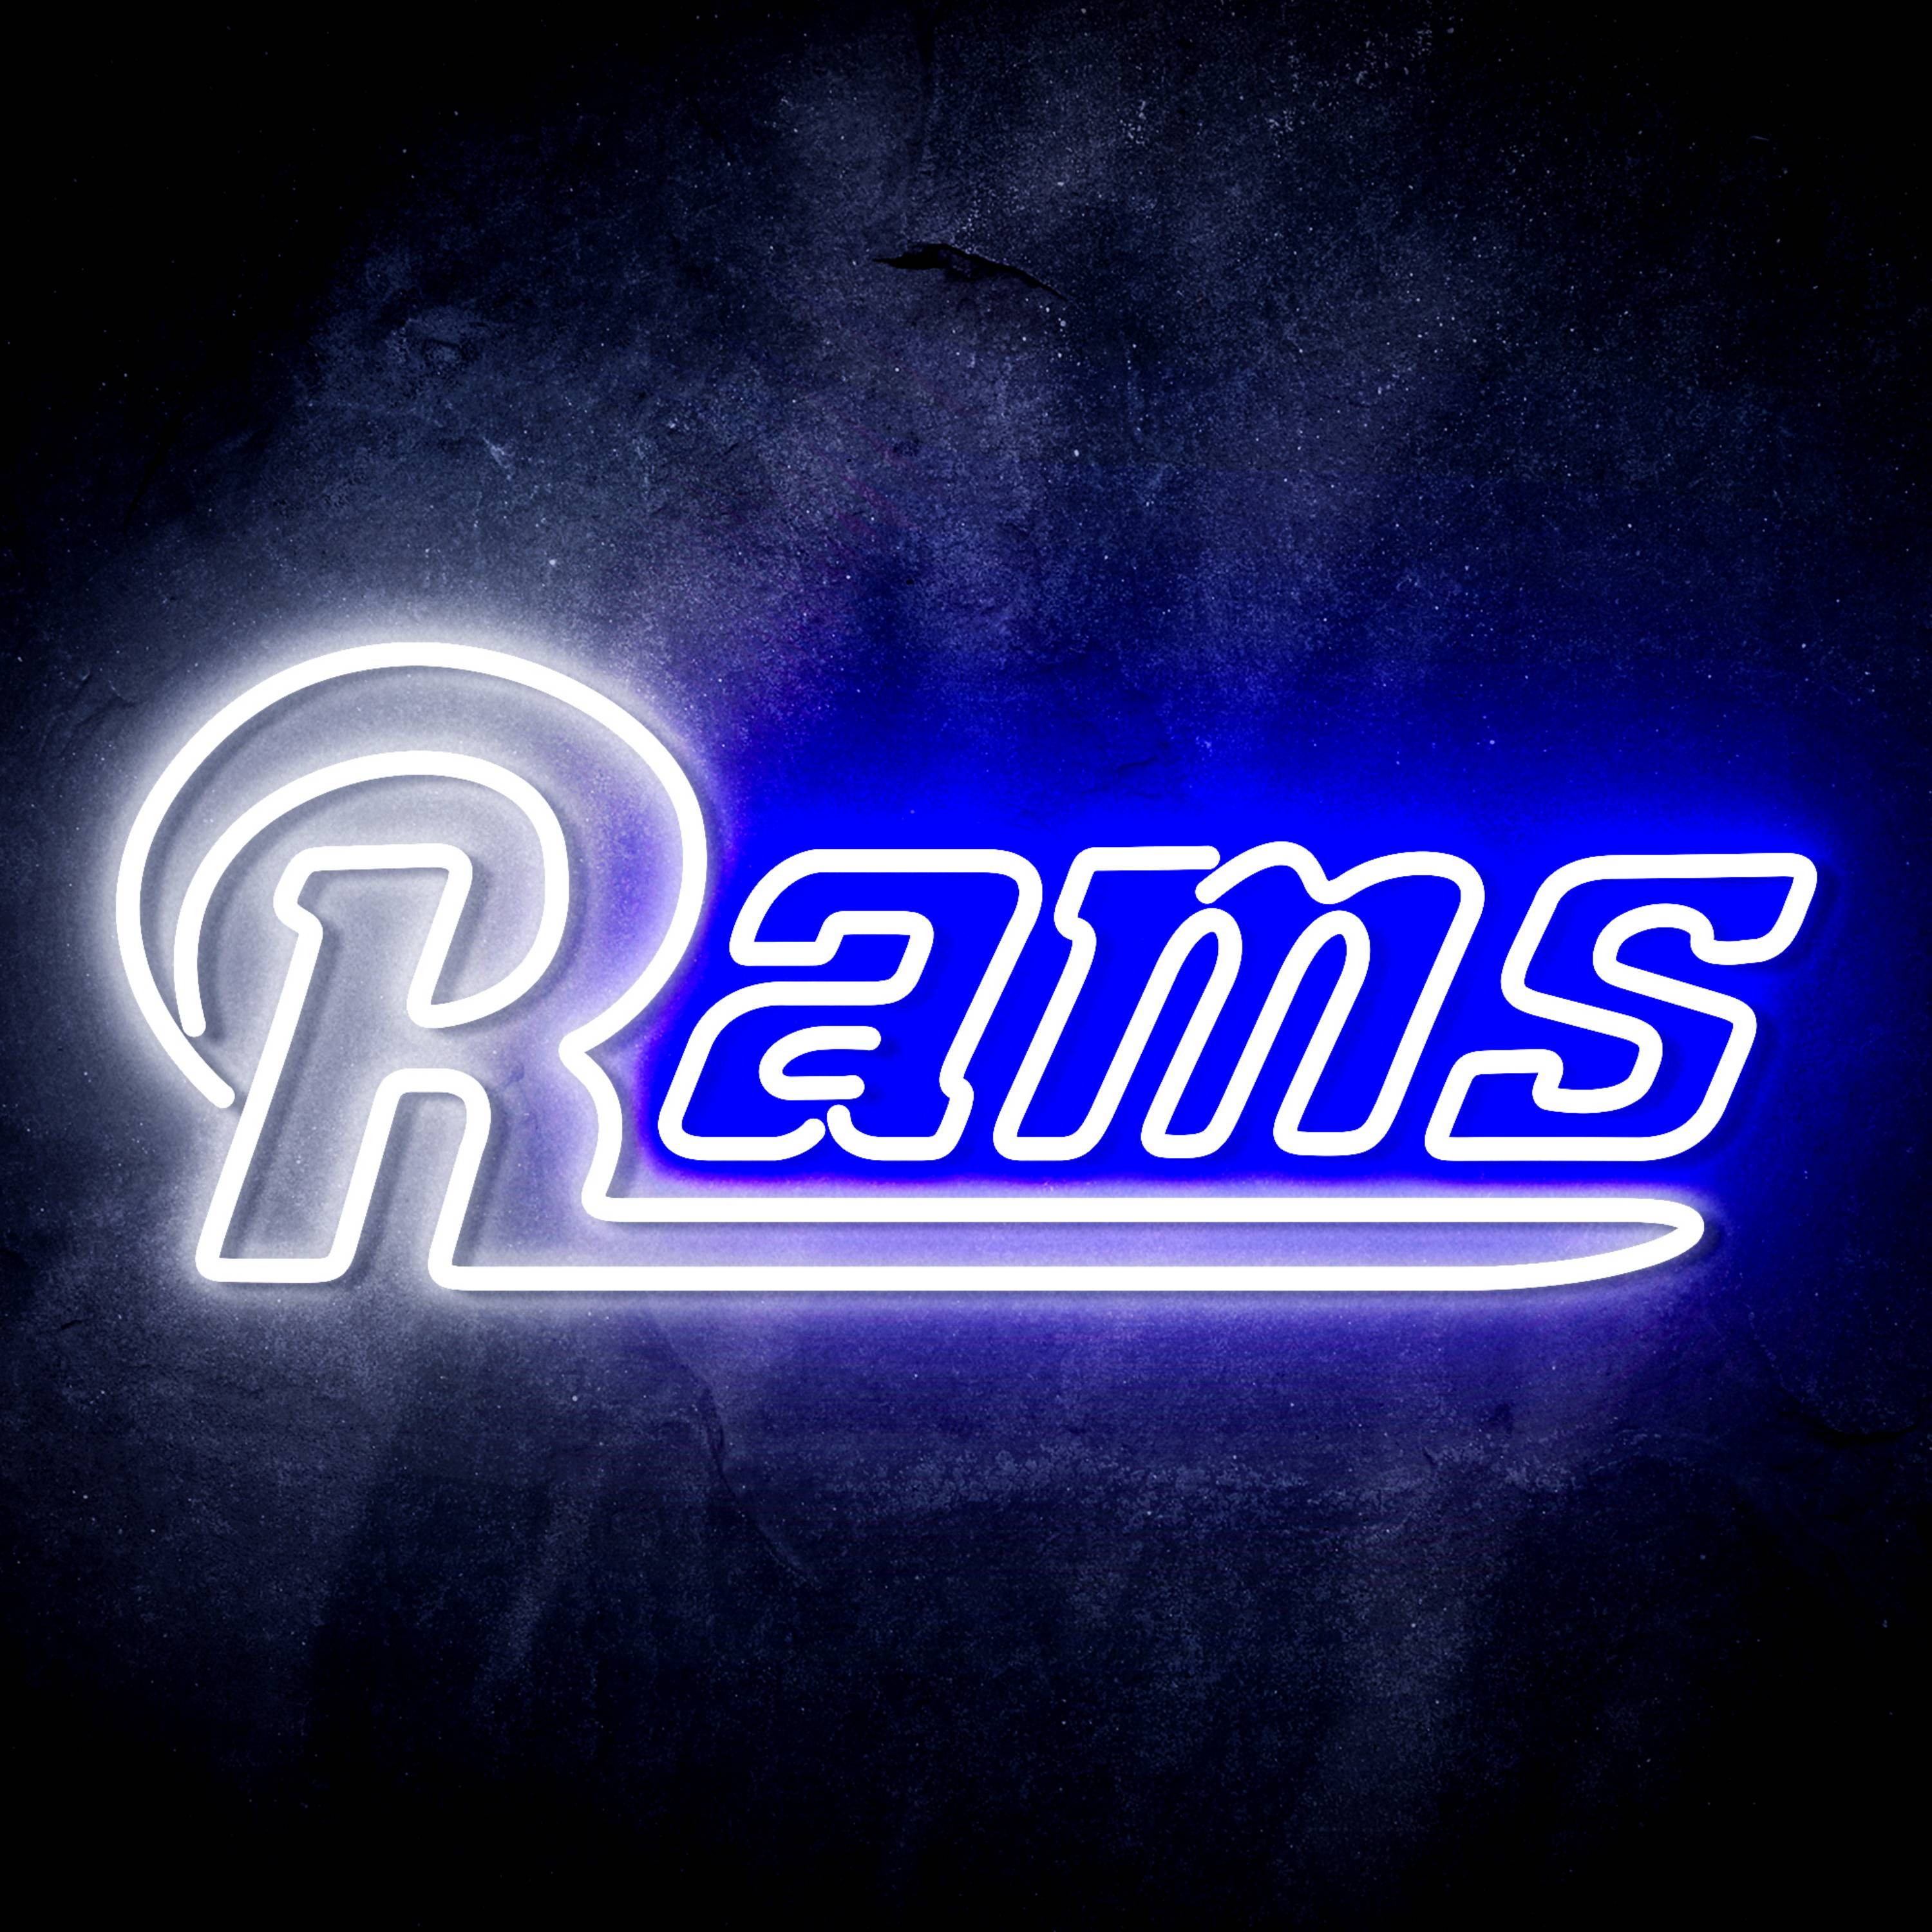 NFL RAMS LED Neon Sign